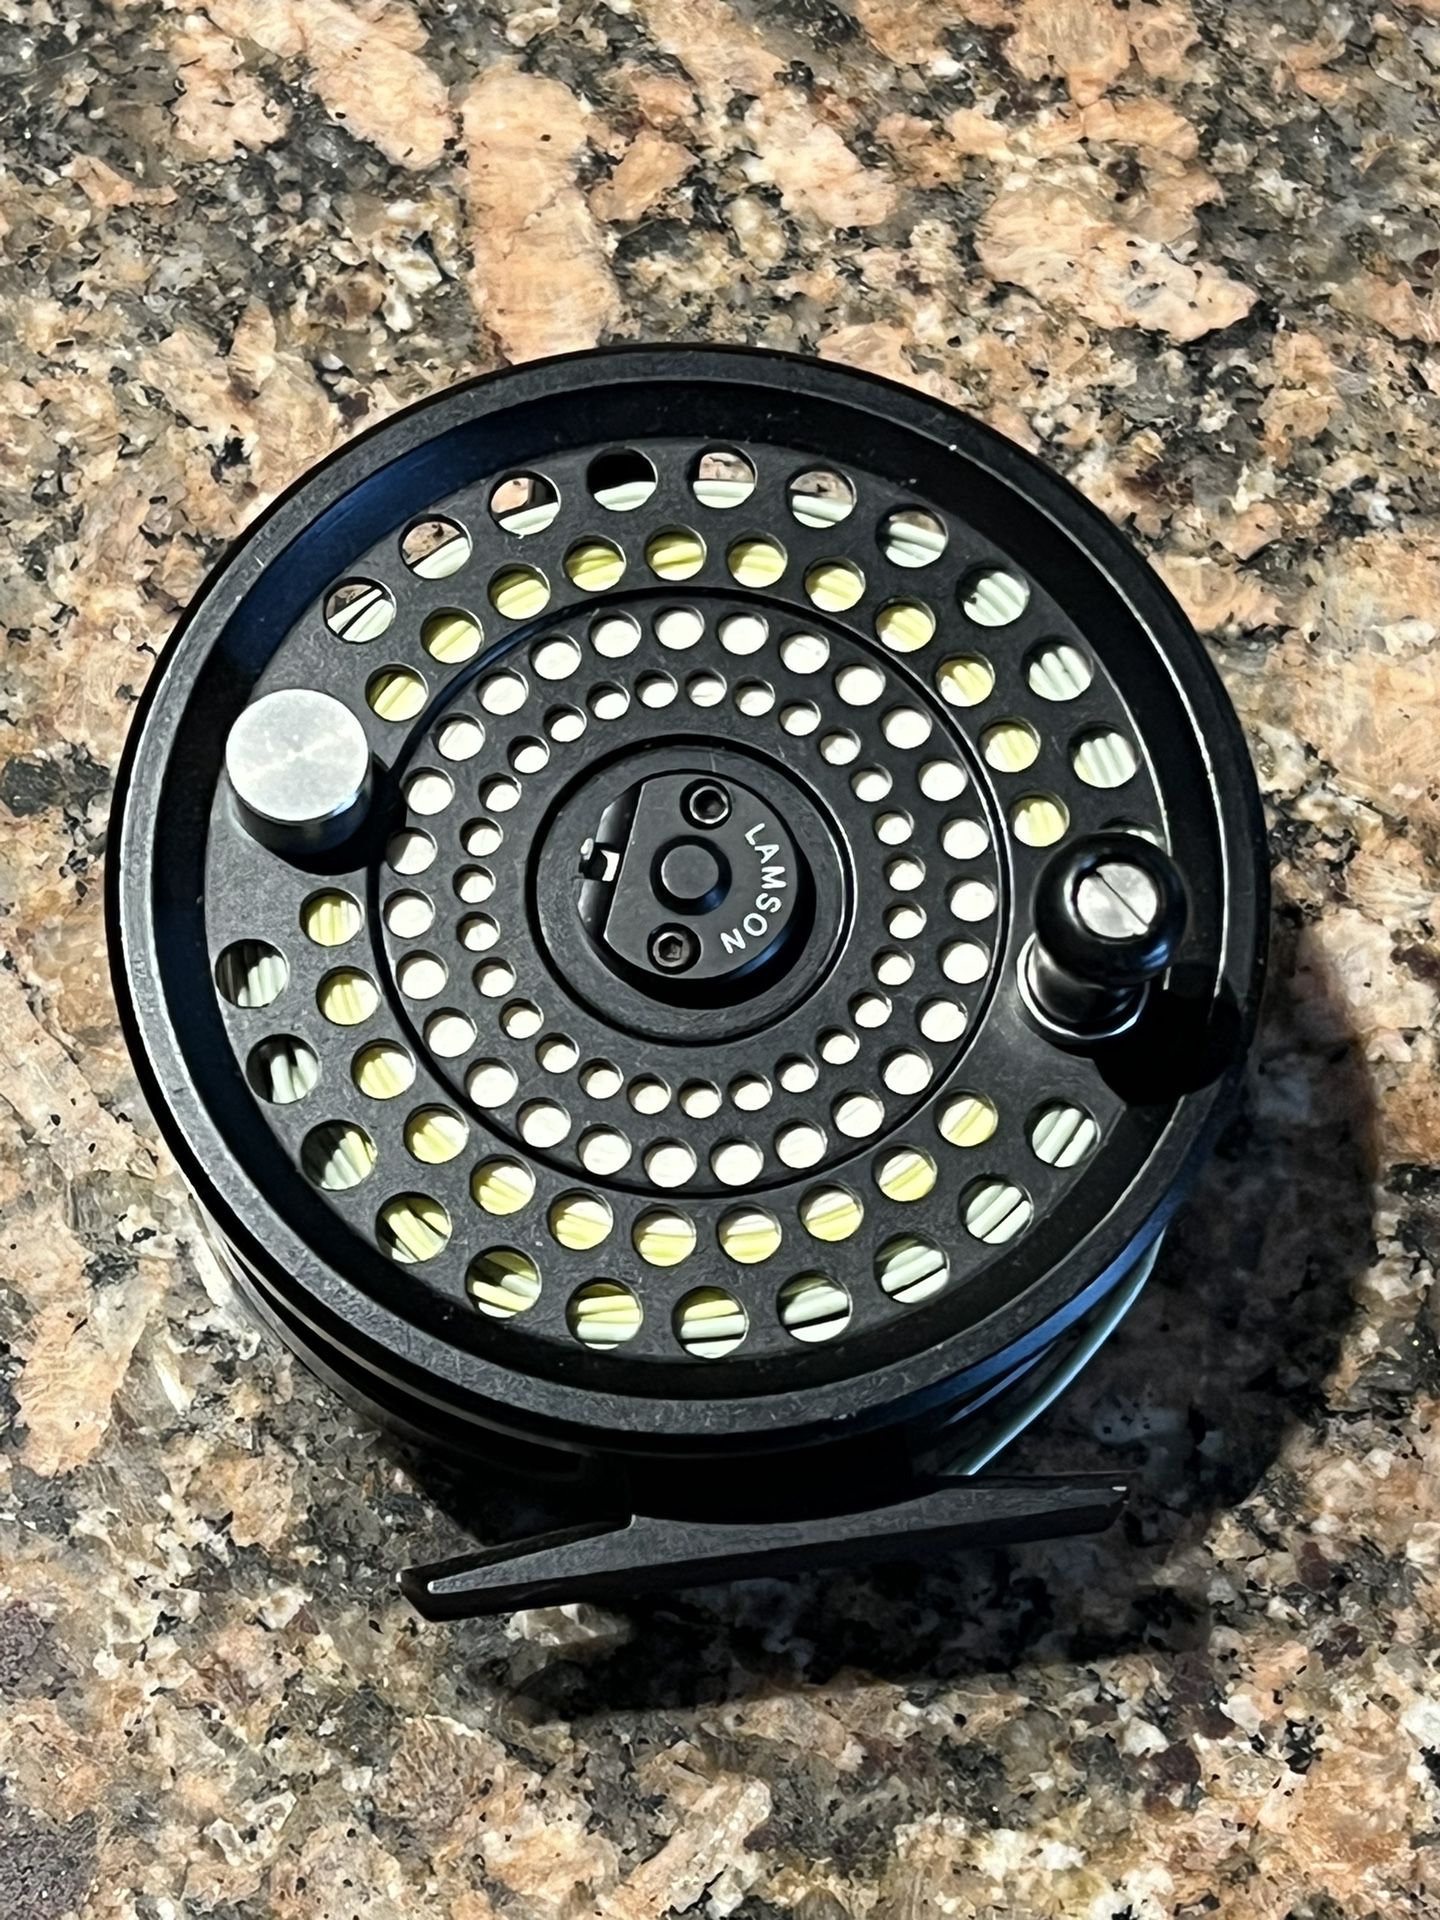 Lamson LP3.5 Fly Reel for Sale in Portland, OR - OfferUp